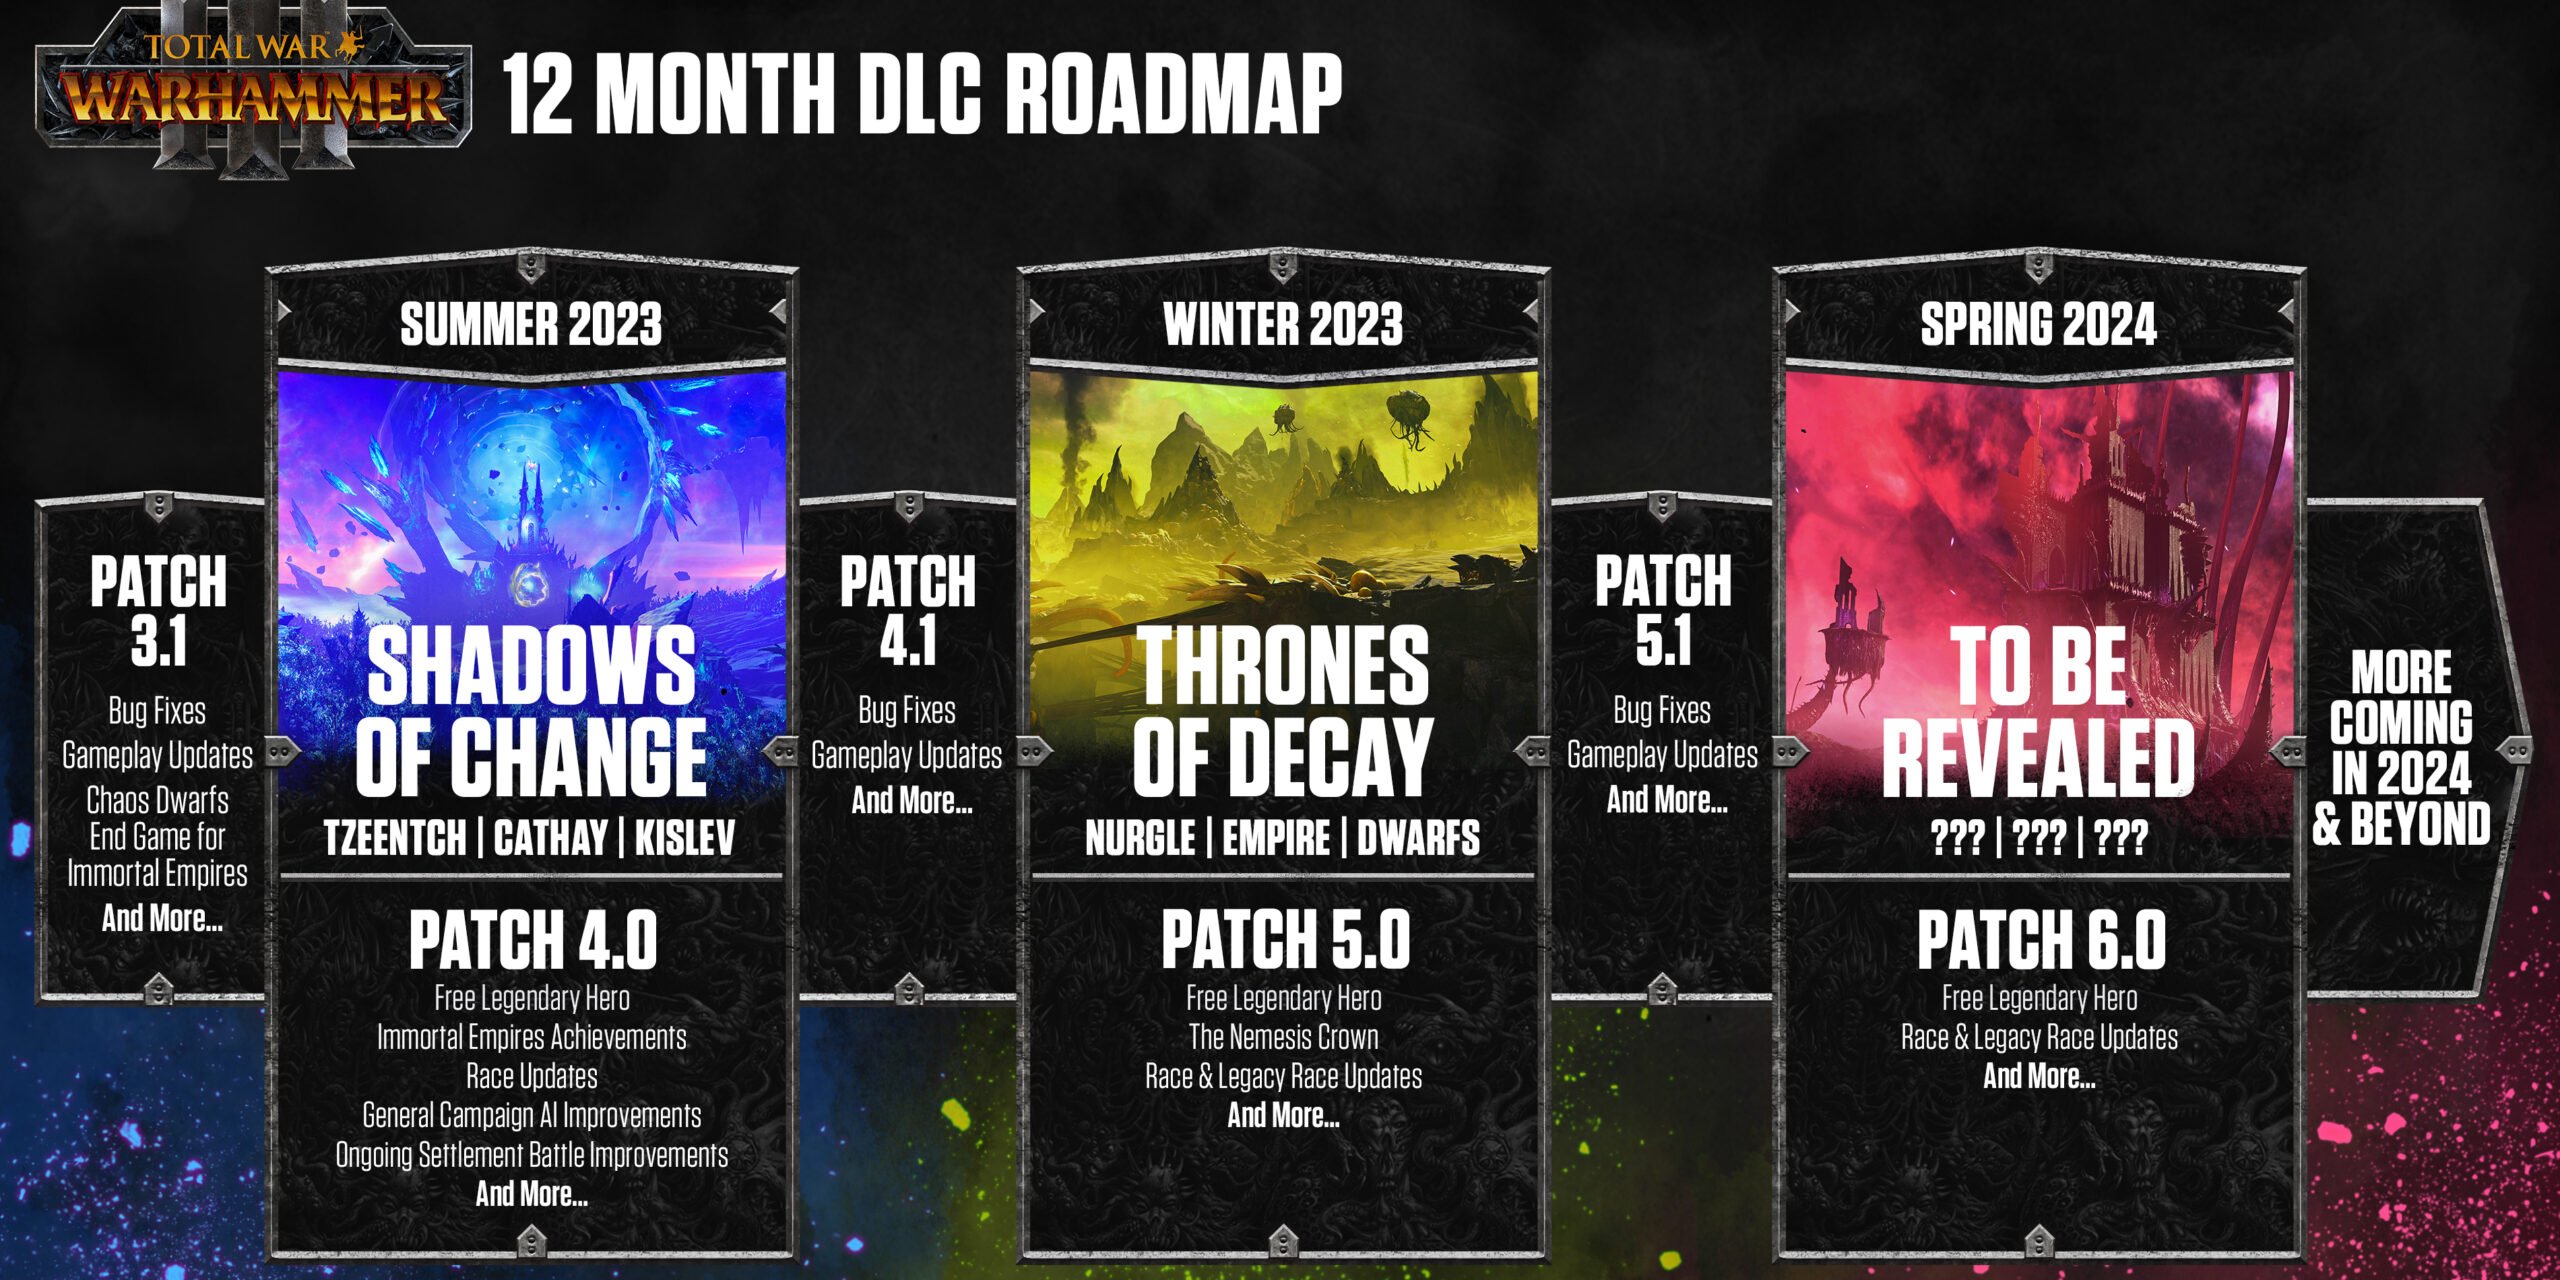 Total Warhammer 3's DLC Roadmap for 2023 and Beyond 2Game